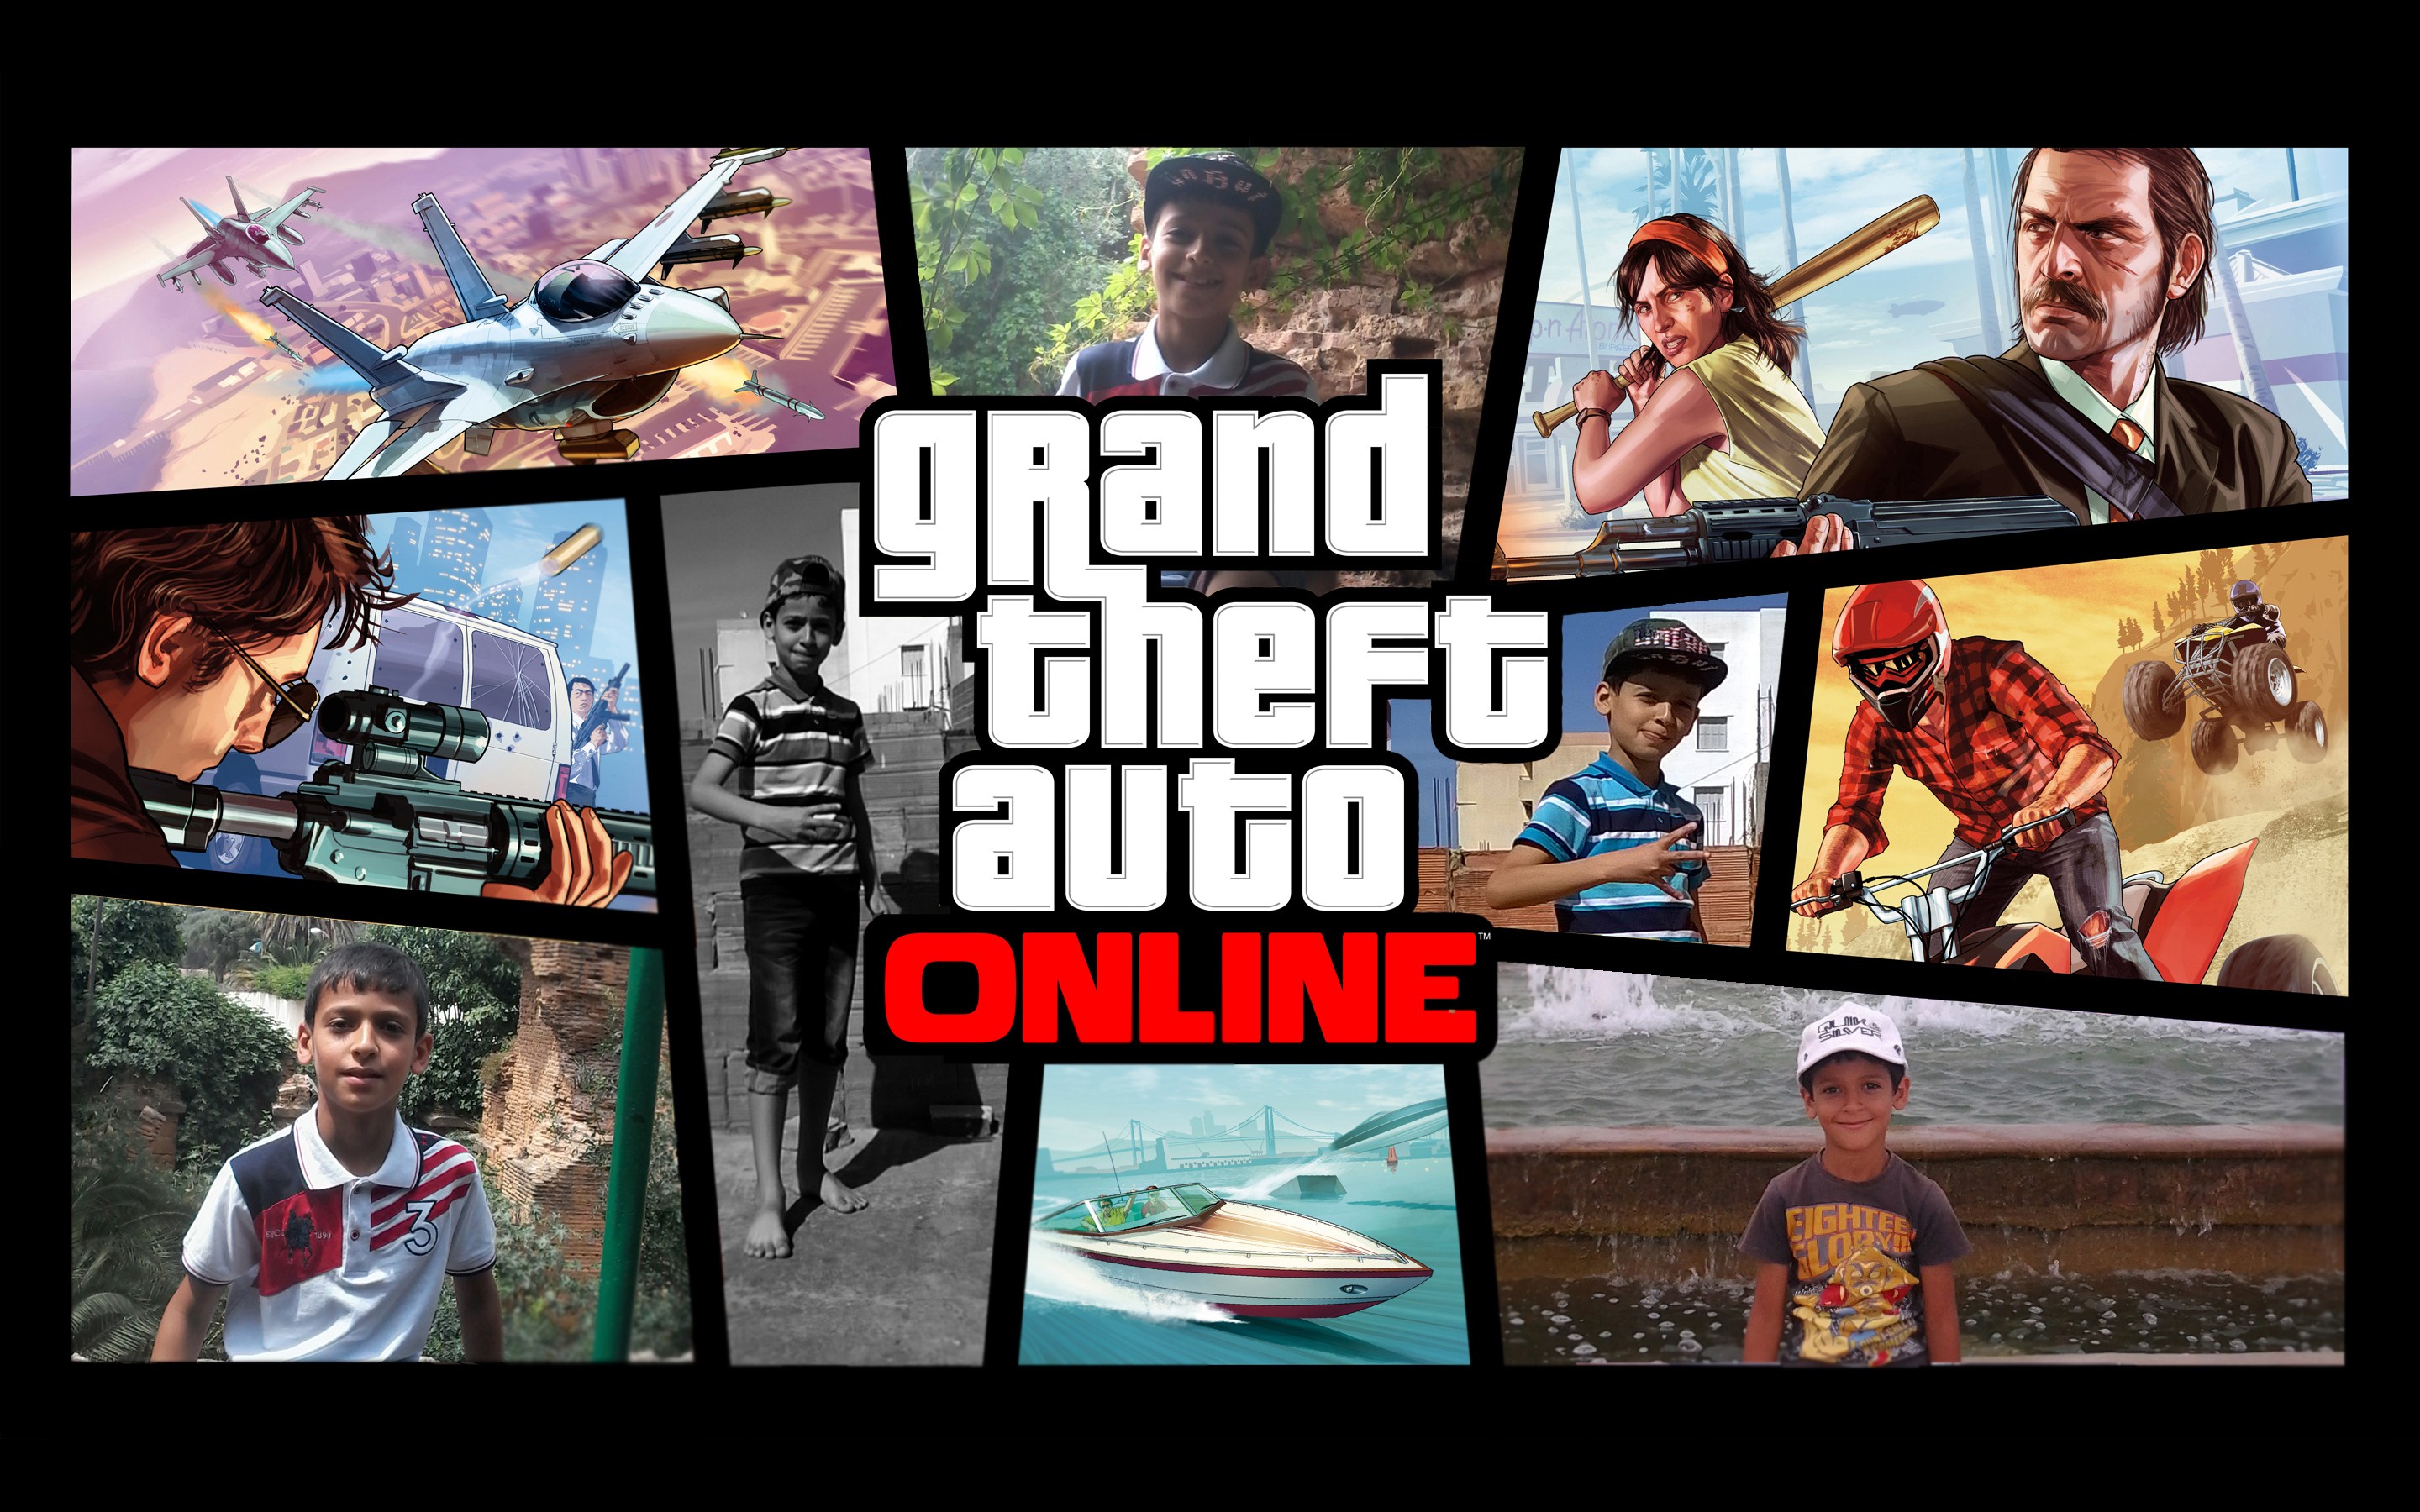 Grand Theft Auto Online, Grand Theft Auto V, PC Gaming Wallpaper